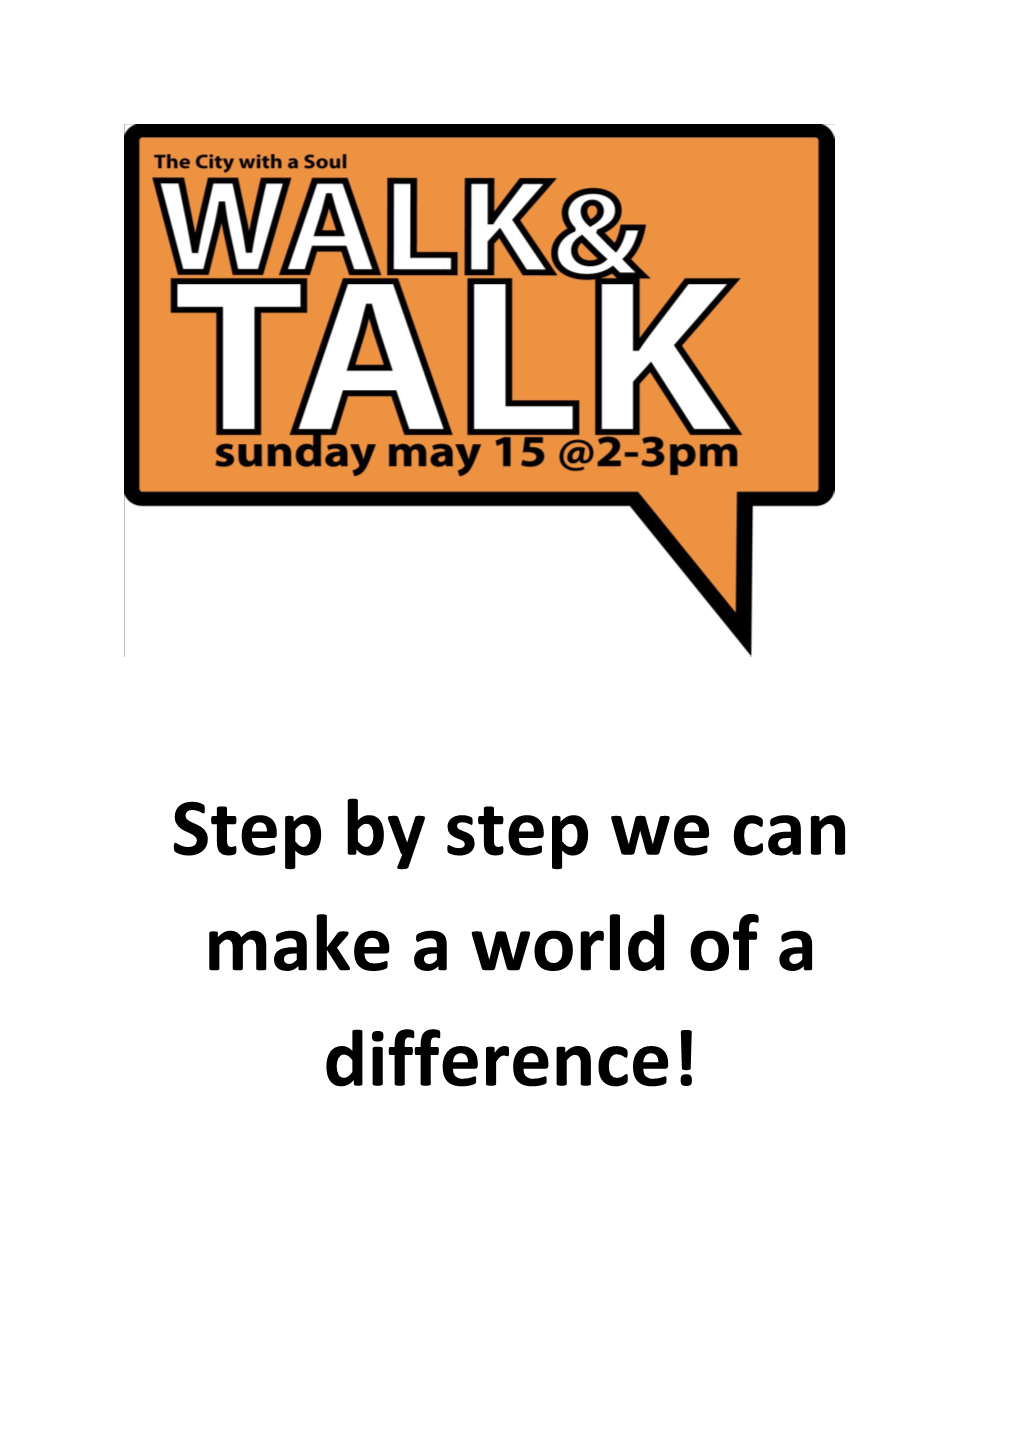 Hello and Thank You for Your Interest in Walk and Talk-City with a Soul